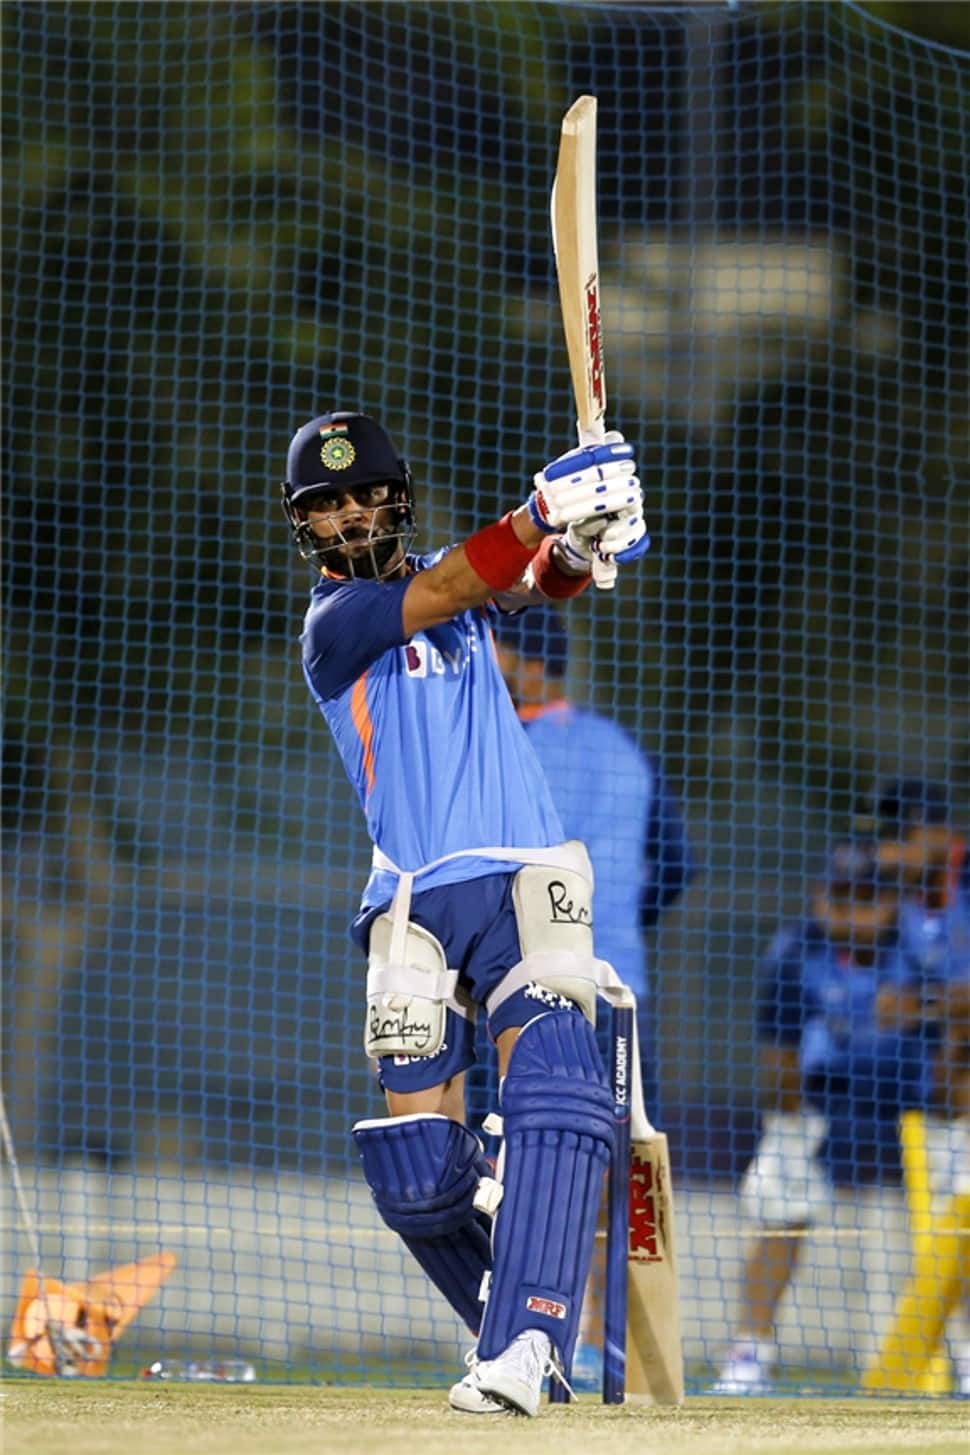 Virat Kohli scored 72 not out off just 44 balls, making his last 55 runs off 28 balls against South Africa at the 2014 T20 World Cup. (Photo: IANS)